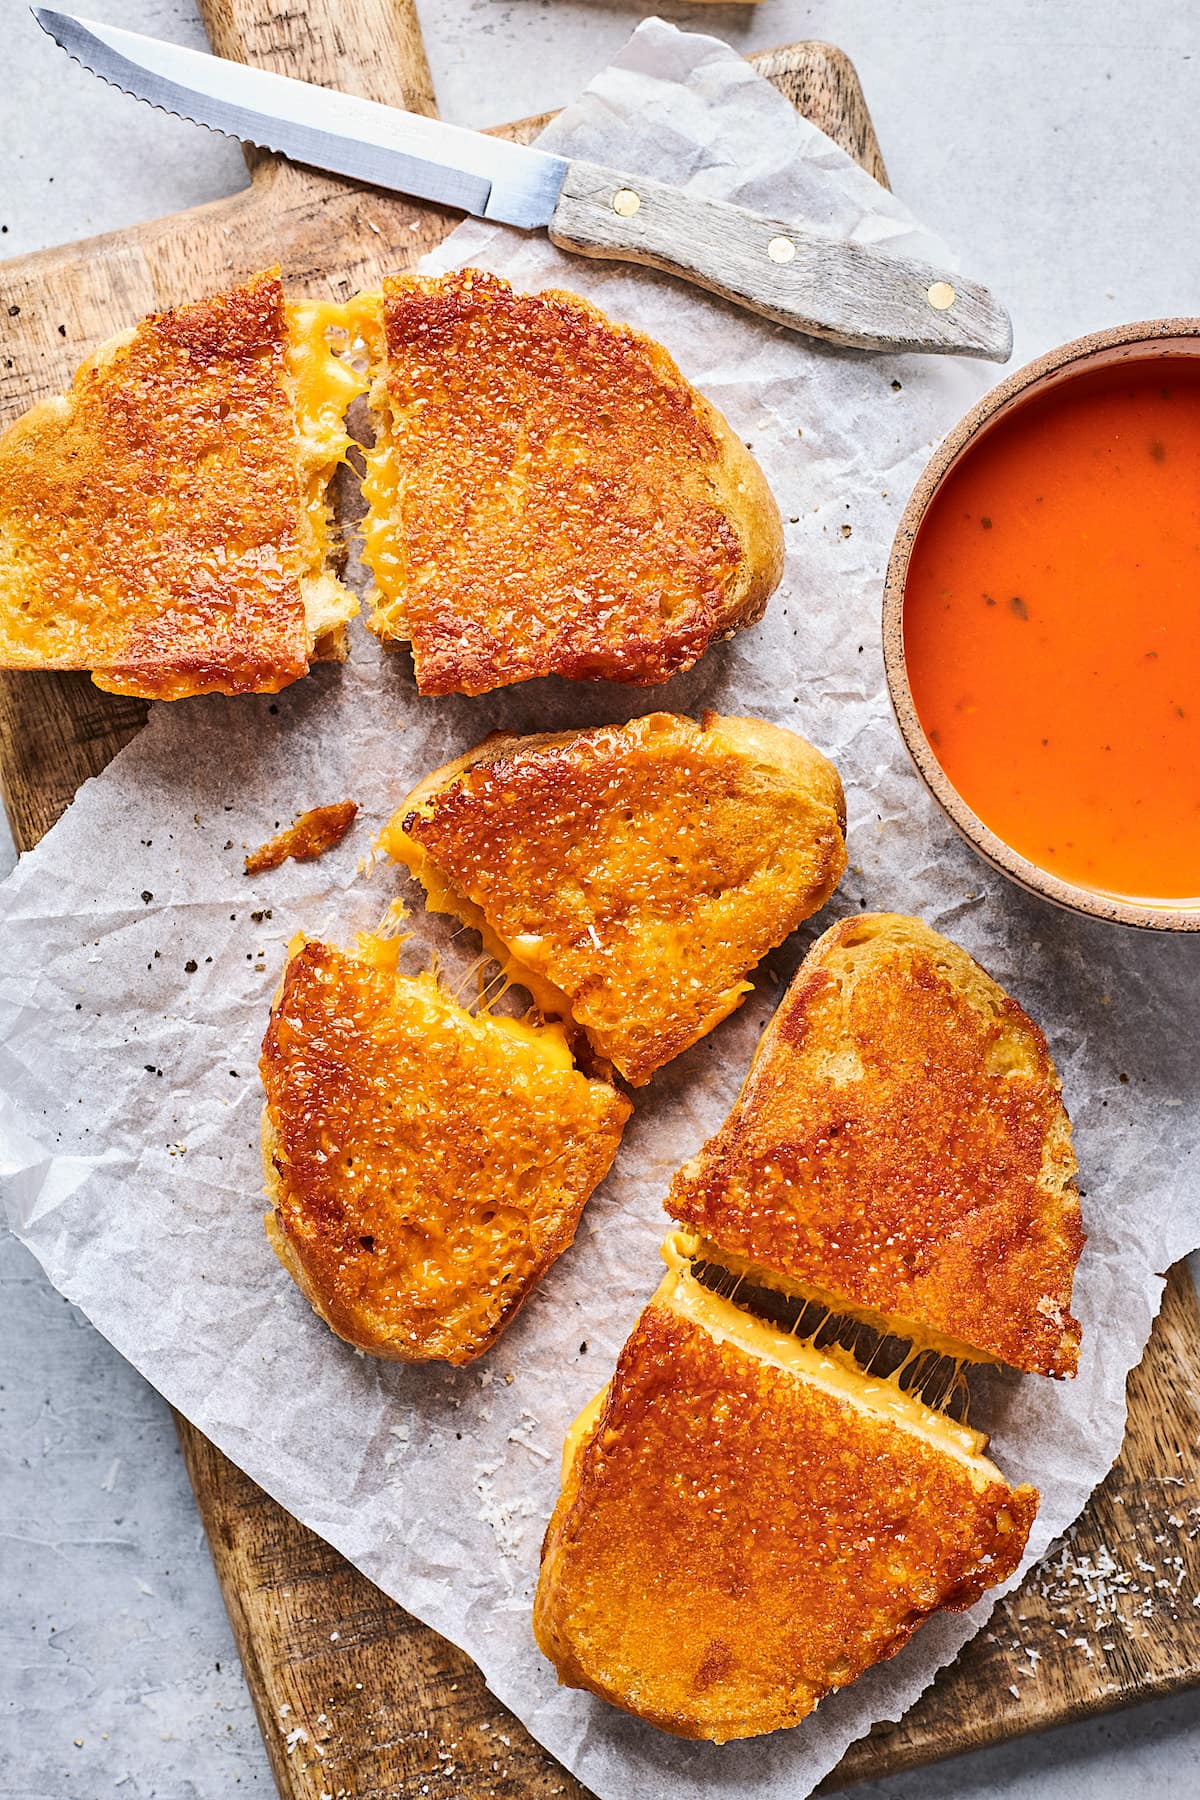 cheese crusted grilled cheese sandwiches on parchment paper on wood board with a bowl of tomato soup.